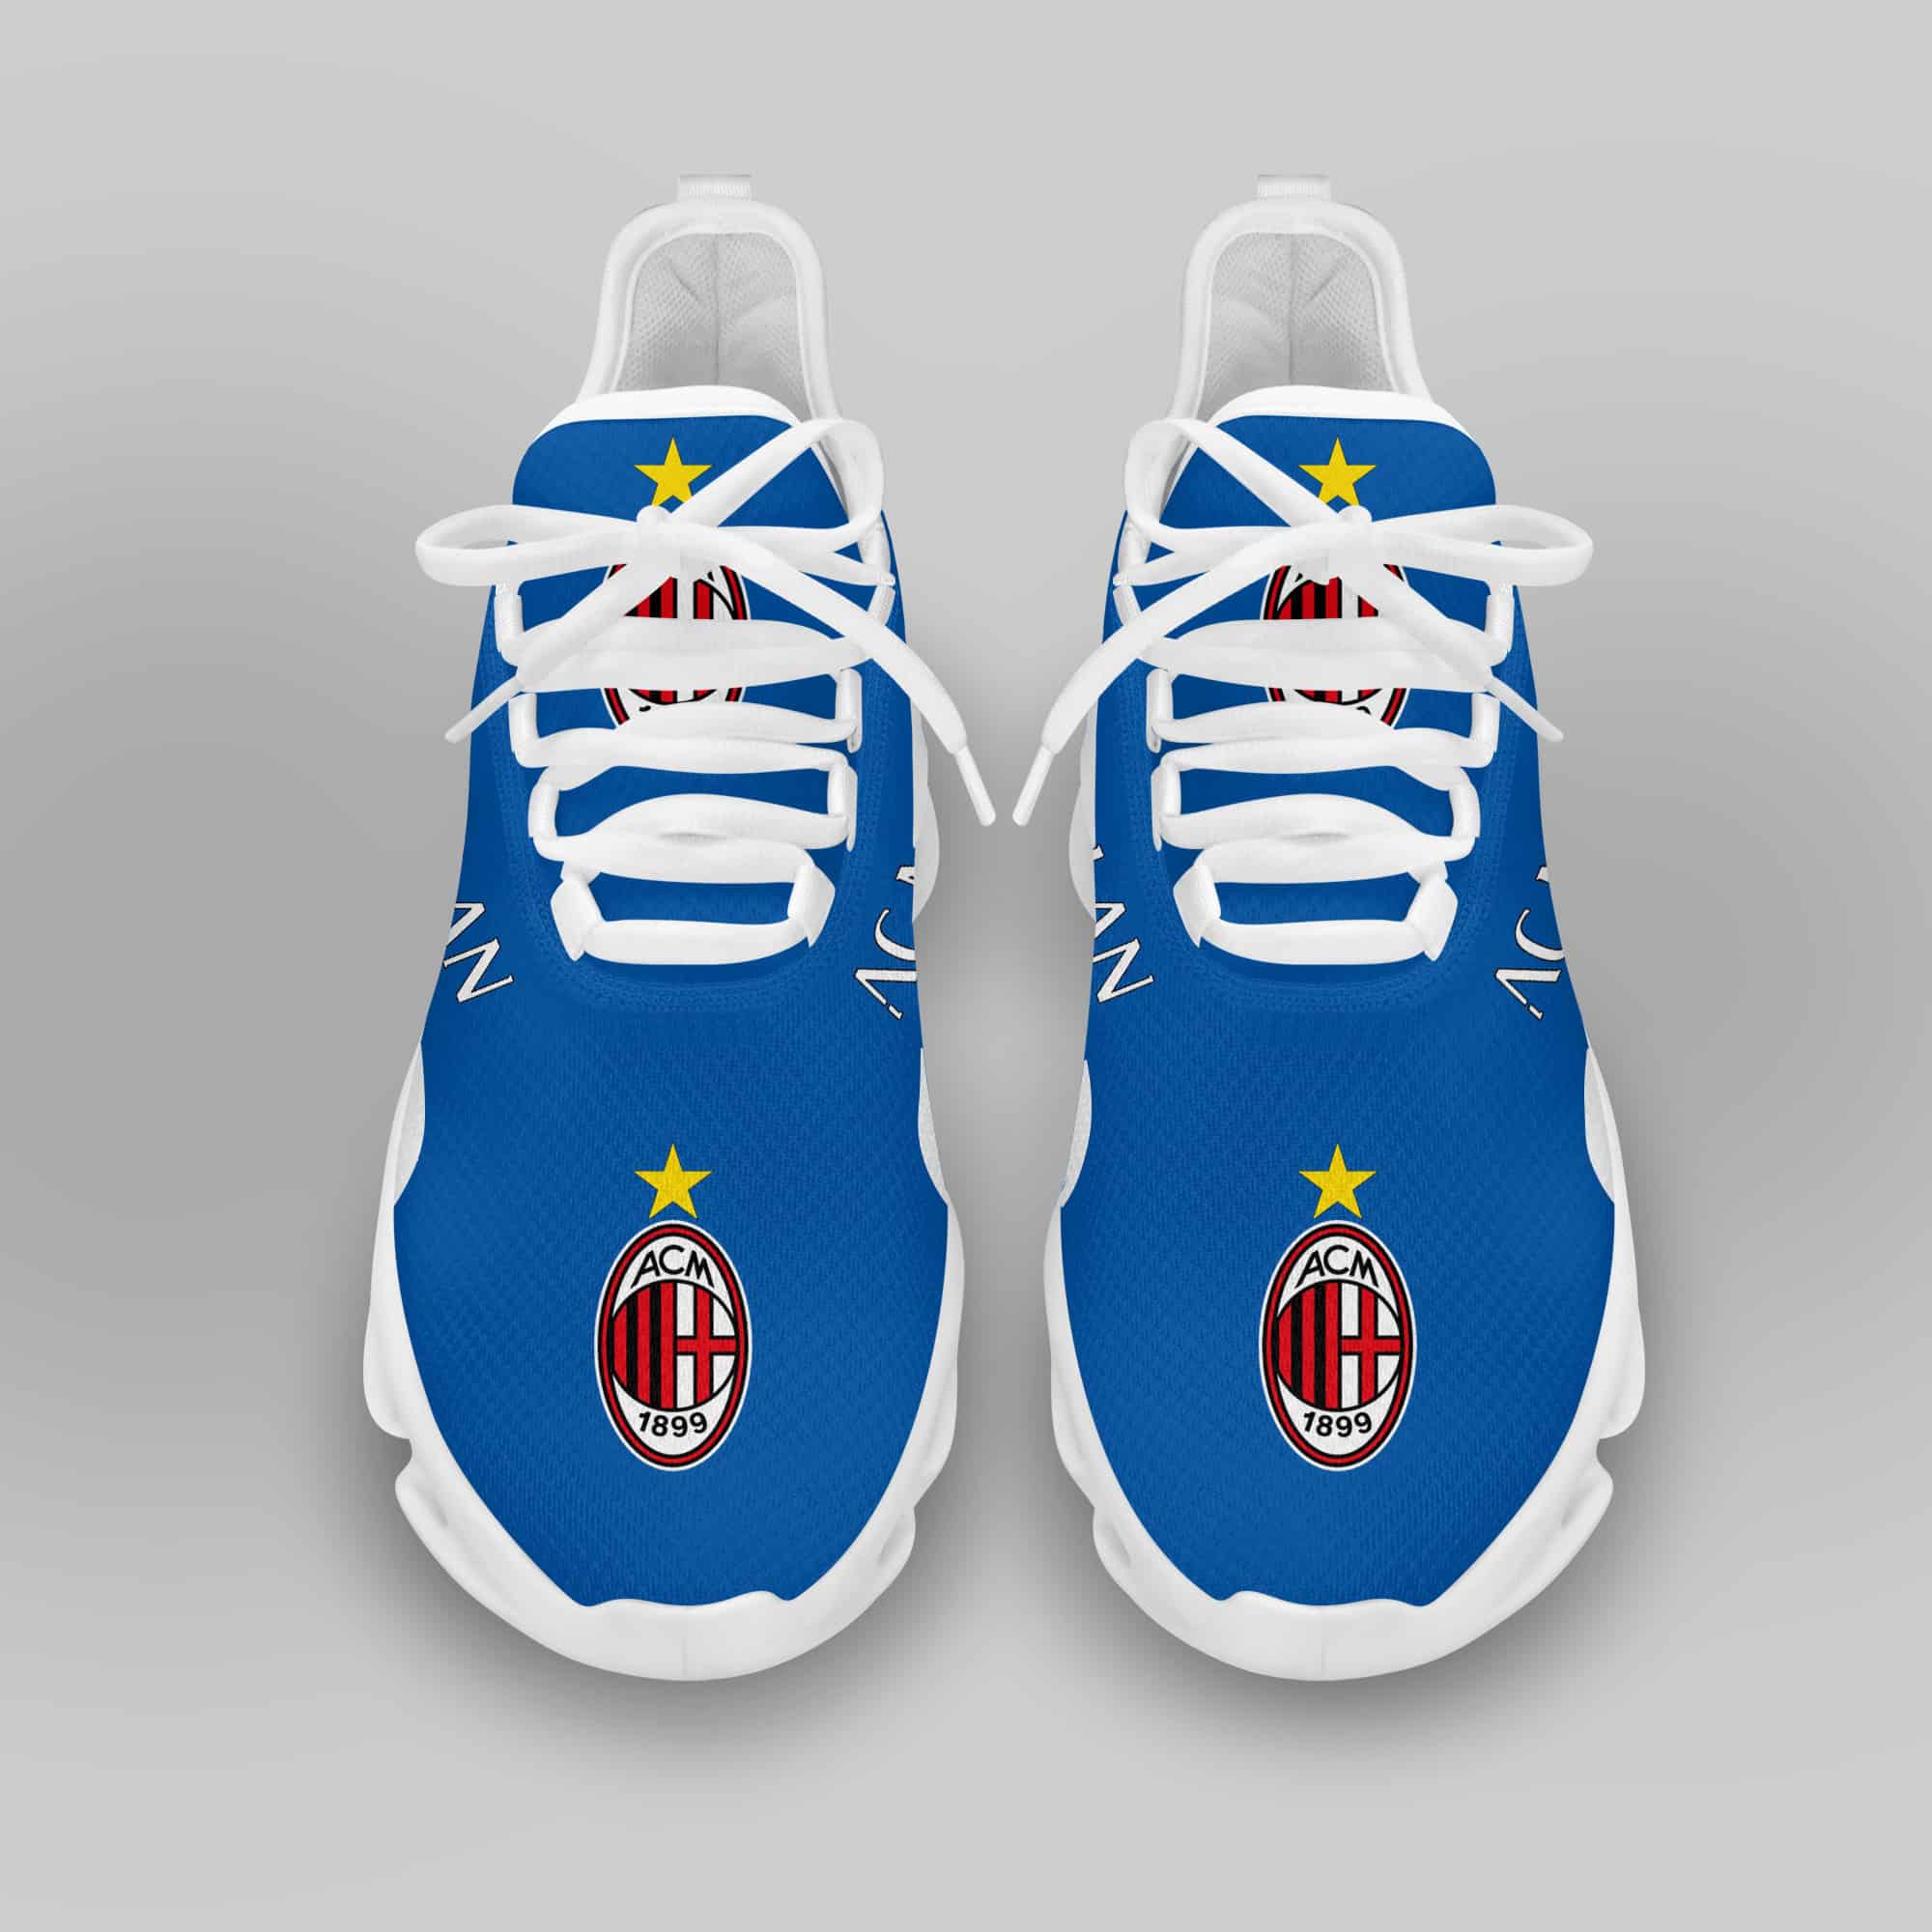 Ac Milan Running Shoes Max Soul Shoes Sneakers Ver 5 3